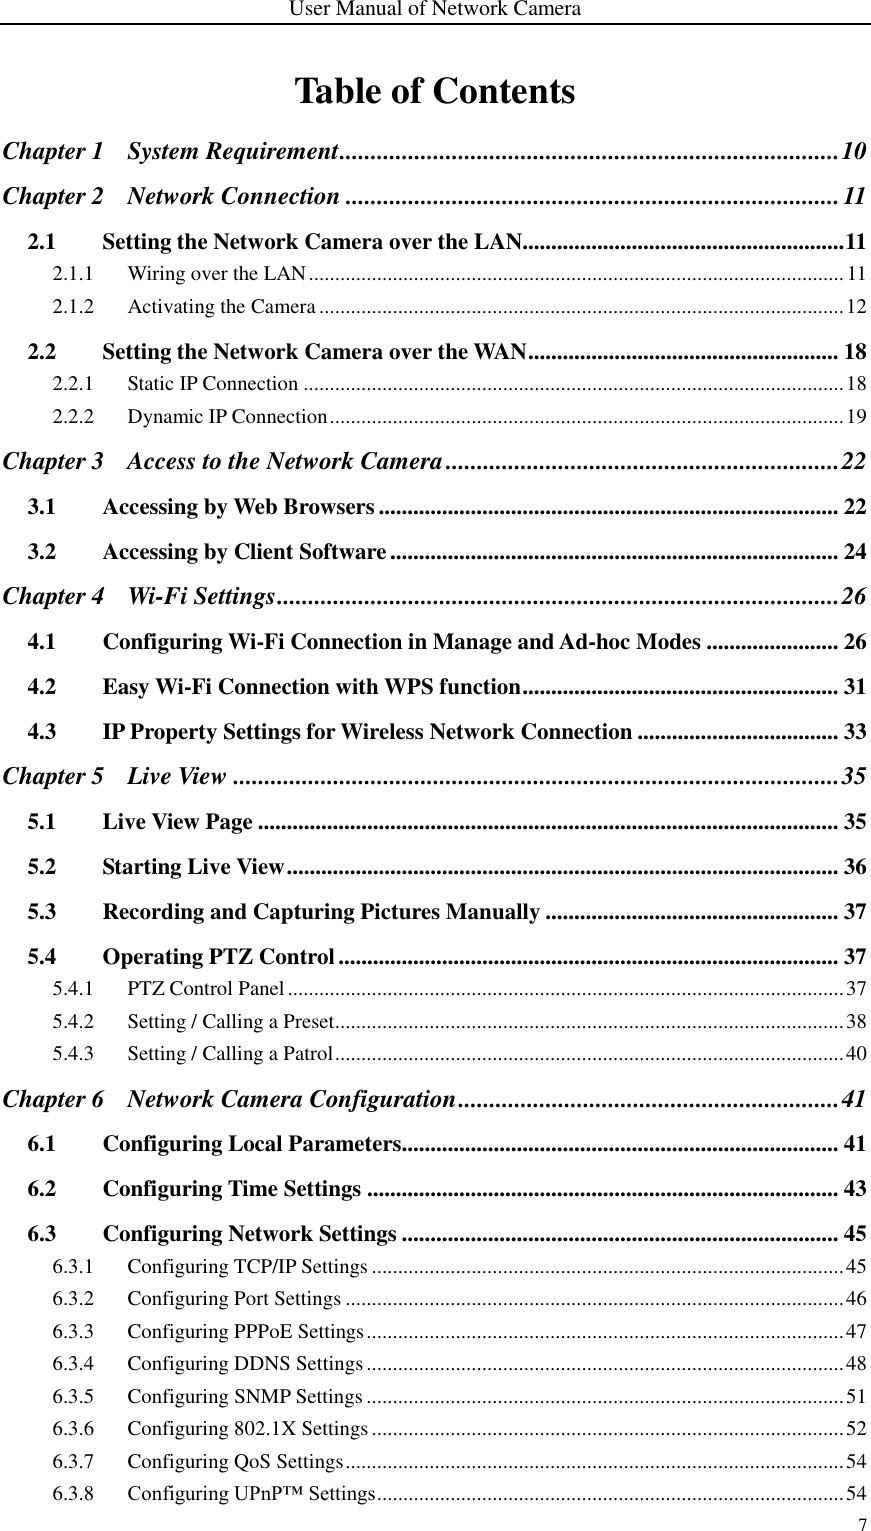 User Manual of Network Camera 7  Table of Contents Chapter 1 System Requirement ................................................................................ 10 Chapter 2 Network Connection ............................................................................... 11 2.1 Setting the Network Camera over the LAN........................................................ 11 2.1.1 Wiring over the LAN ...................................................................................................... 11 2.1.2 Activating the Camera .................................................................................................... 12 2.2 Setting the Network Camera over the WAN ...................................................... 18 2.2.1 Static IP Connection ....................................................................................................... 18 2.2.2 Dynamic IP Connection .................................................................................................. 19 Chapter 3 Access to the Network Camera ............................................................... 22 3.1 Accessing by Web Browsers ................................................................................ 22 3.2 Accessing by Client Software .............................................................................. 24 Chapter 4 Wi-Fi Settings .......................................................................................... 26 4.1 Configuring Wi-Fi Connection in Manage and Ad-hoc Modes ....................... 26 4.2 Easy Wi-Fi Connection with WPS function ....................................................... 31 4.3 IP Property Settings for Wireless Network Connection ................................... 33 Chapter 5 Live View ................................................................................................. 35 5.1 Live View Page ..................................................................................................... 35 5.2 Starting Live View ................................................................................................ 36 5.3 Recording and Capturing Pictures Manually ................................................... 37 5.4 Operating PTZ Control ....................................................................................... 37 5.4.1 PTZ Control Panel .......................................................................................................... 37 5.4.2 Setting / Calling a Preset................................................................................................. 38 5.4.3 Setting / Calling a Patrol ................................................................................................. 40 Chapter 6 Network Camera Configuration ............................................................. 41 6.1 Configuring Local Parameters............................................................................ 41 6.2 Configuring Time Settings .................................................................................. 43 6.3 Configuring Network Settings ............................................................................ 45 6.3.1 Configuring TCP/IP Settings .......................................................................................... 45 6.3.2 Configuring Port Settings ............................................................................................... 46 6.3.3 Configuring PPPoE Settings ........................................................................................... 47 6.3.4 Configuring DDNS Settings ........................................................................................... 48 6.3.5 Configuring SNMP Settings ........................................................................................... 51 6.3.6 Configuring 802.1X Settings .......................................................................................... 52 6.3.7 Configuring QoS Settings ............................................................................................... 54 6.3.8 Configuring UPnP™ Settings ......................................................................................... 54 